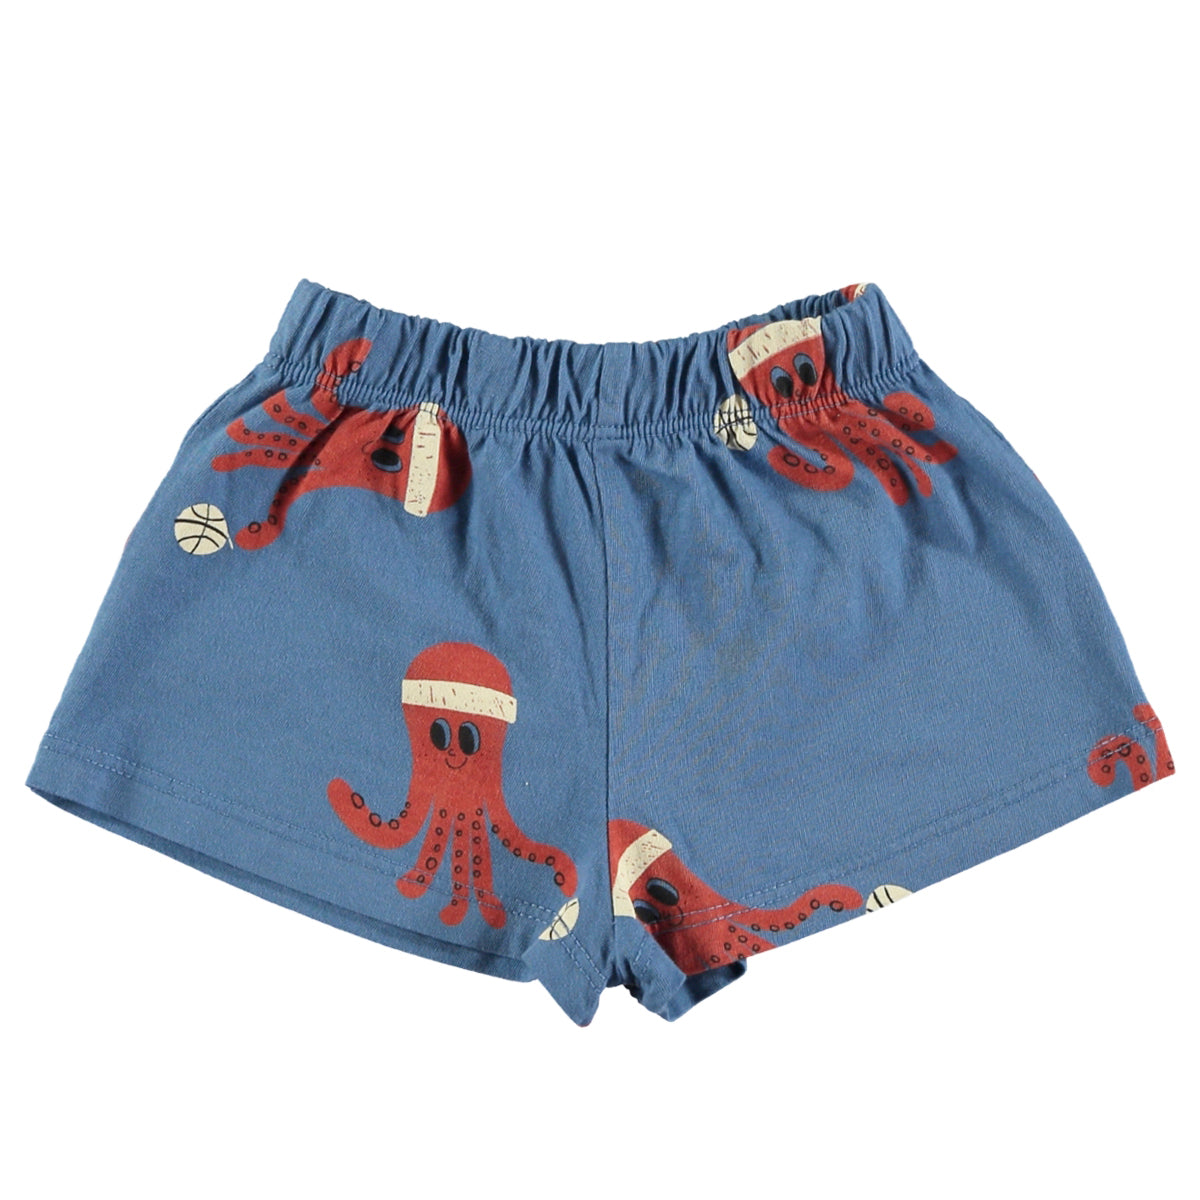 Lotie Kids - baby shorts - octopuses - blue